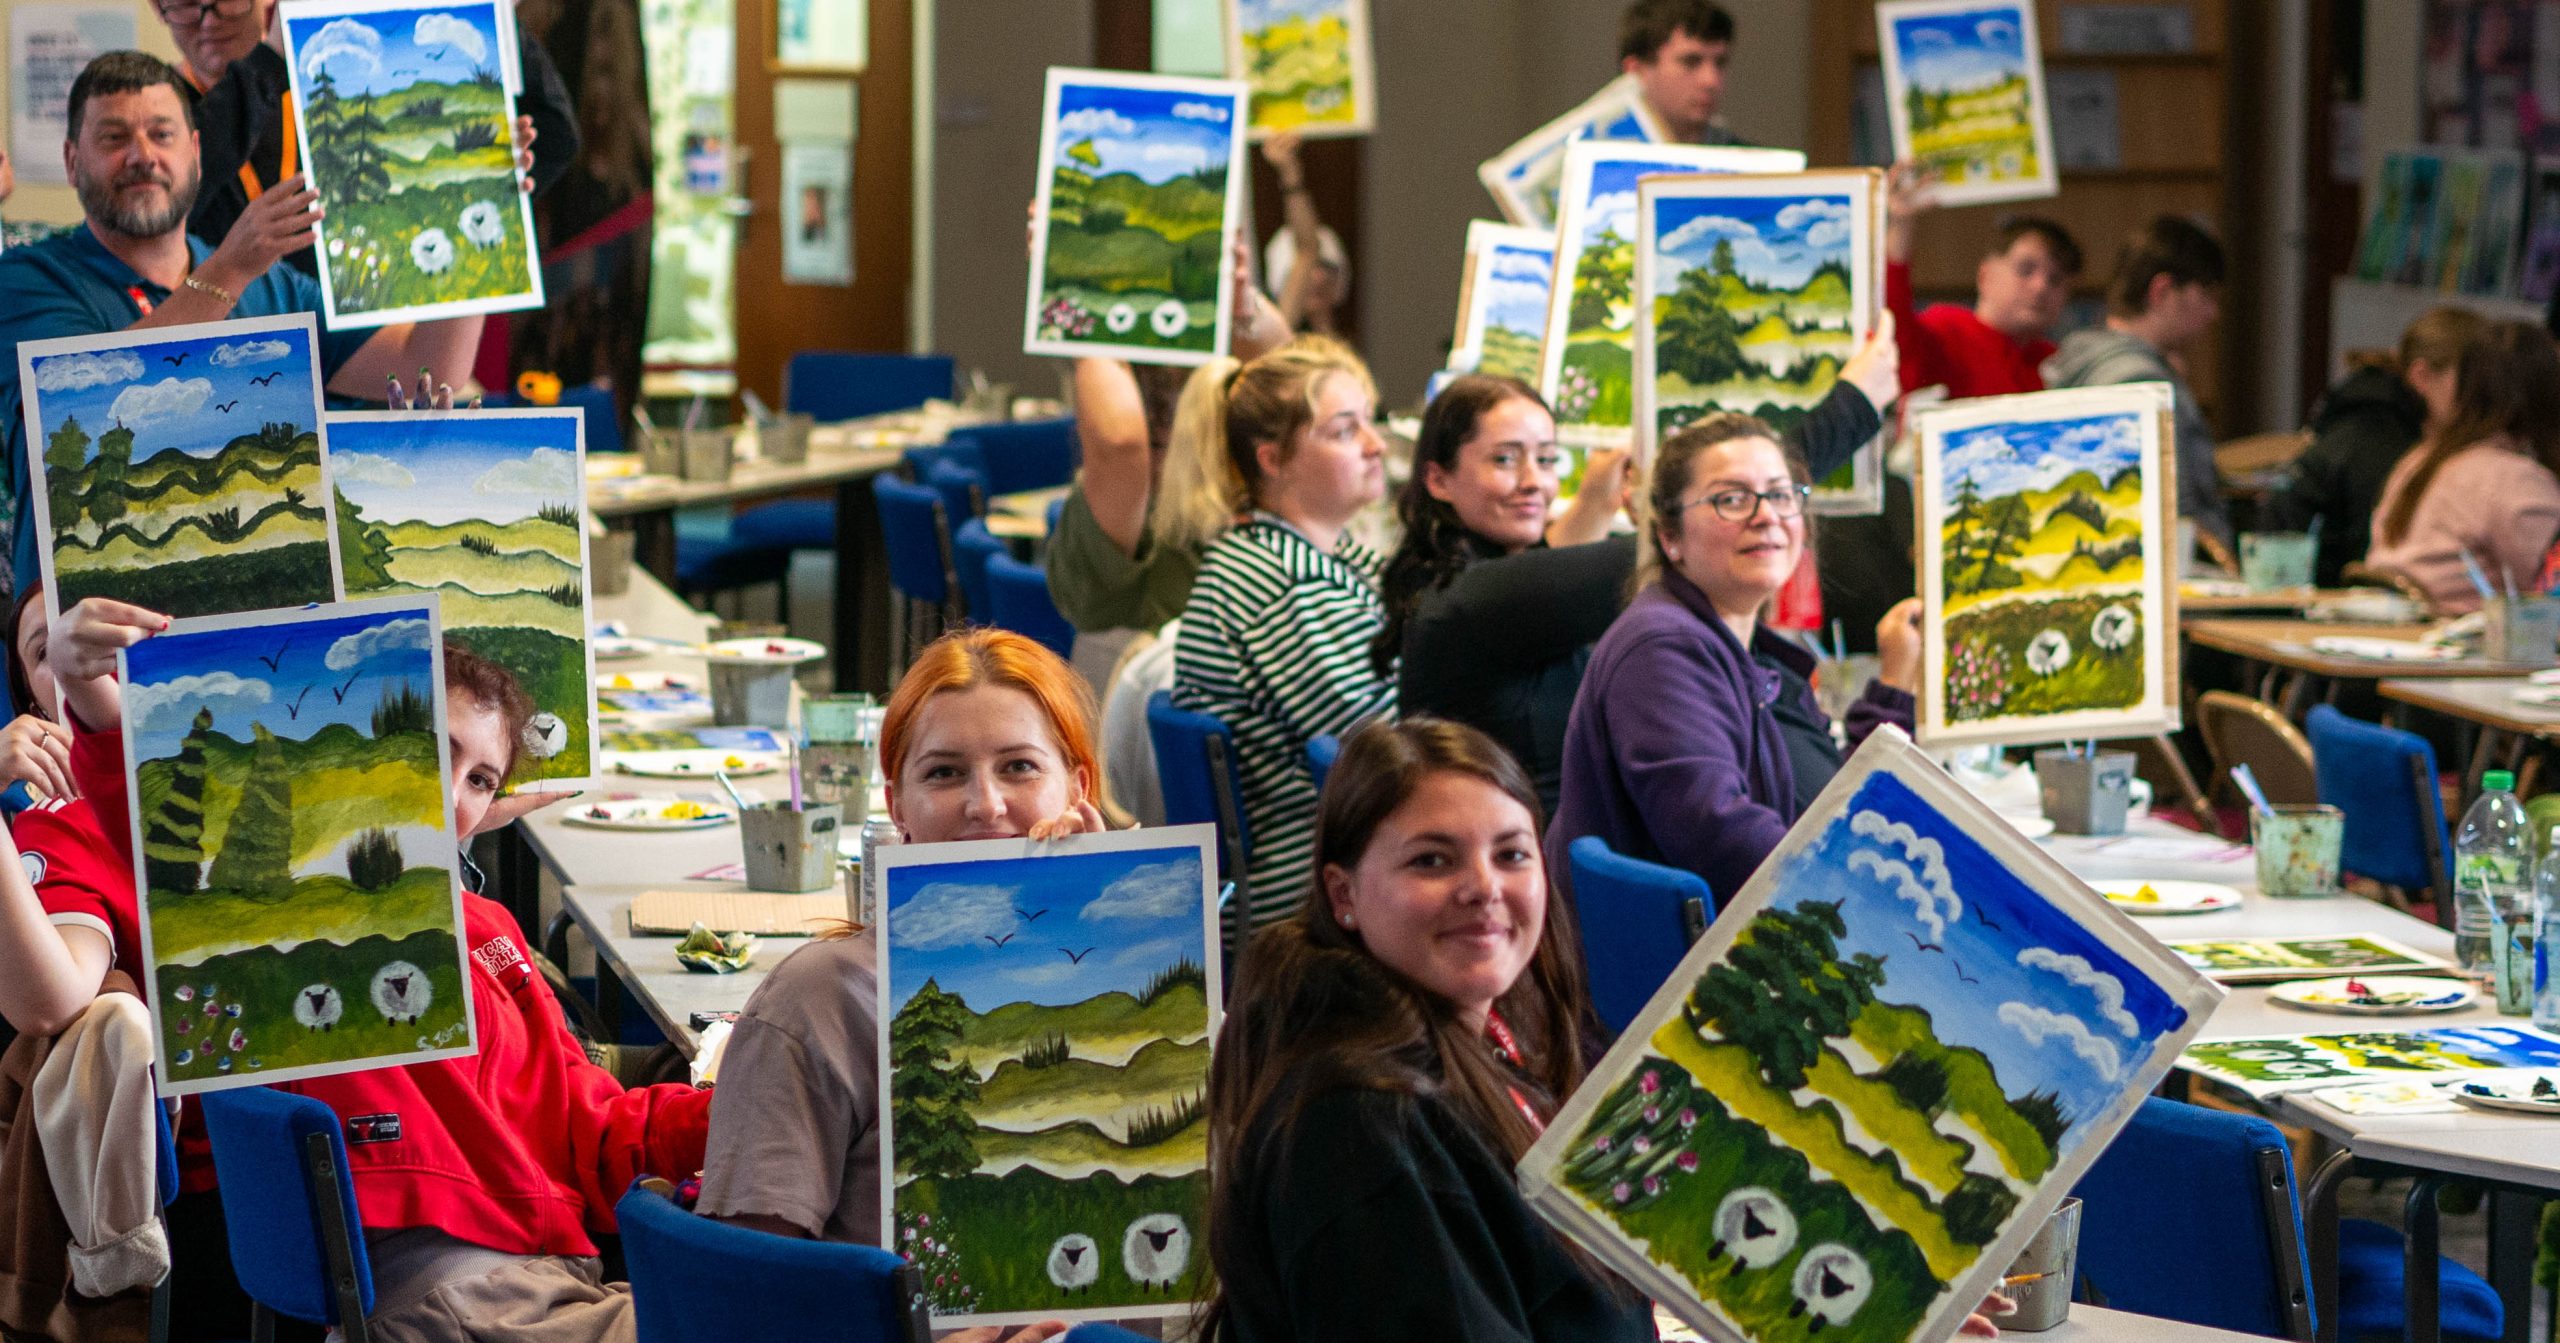 Students and staff holding up finished paintings on canvas of Welsh hill scene with sheep.